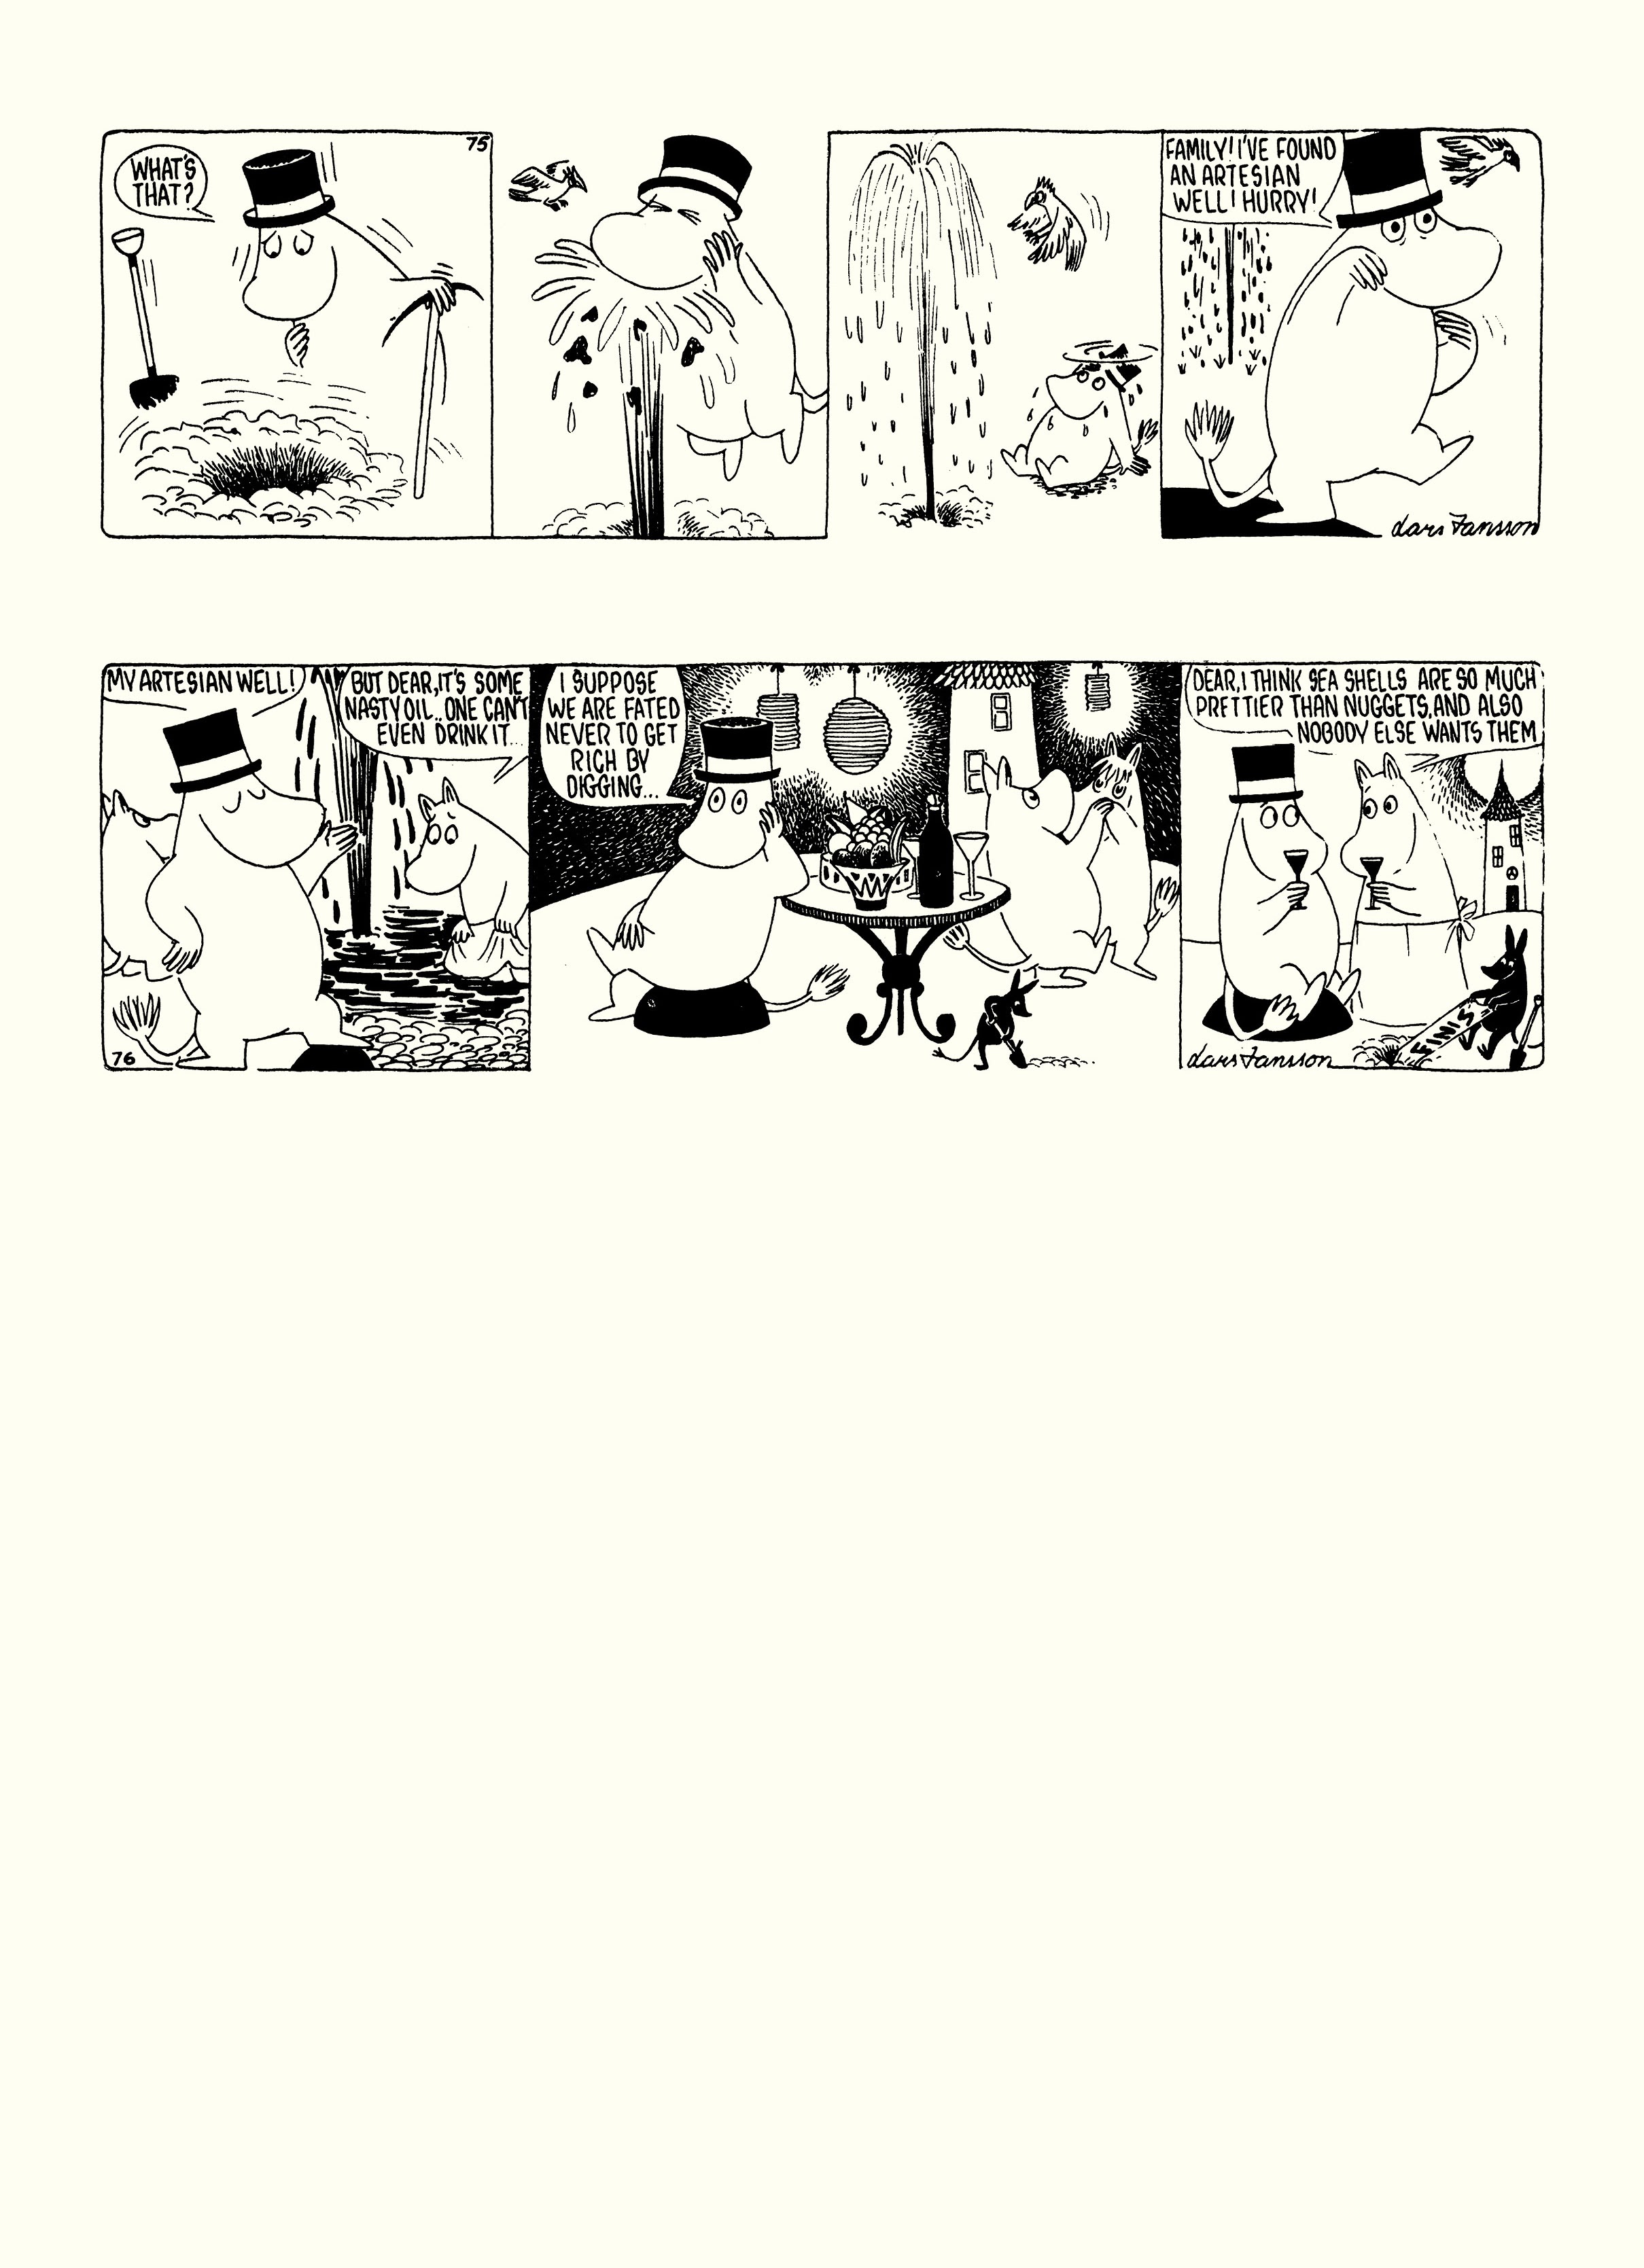 Read online Moomin: The Complete Lars Jansson Comic Strip comic -  Issue # TPB 7 - 88